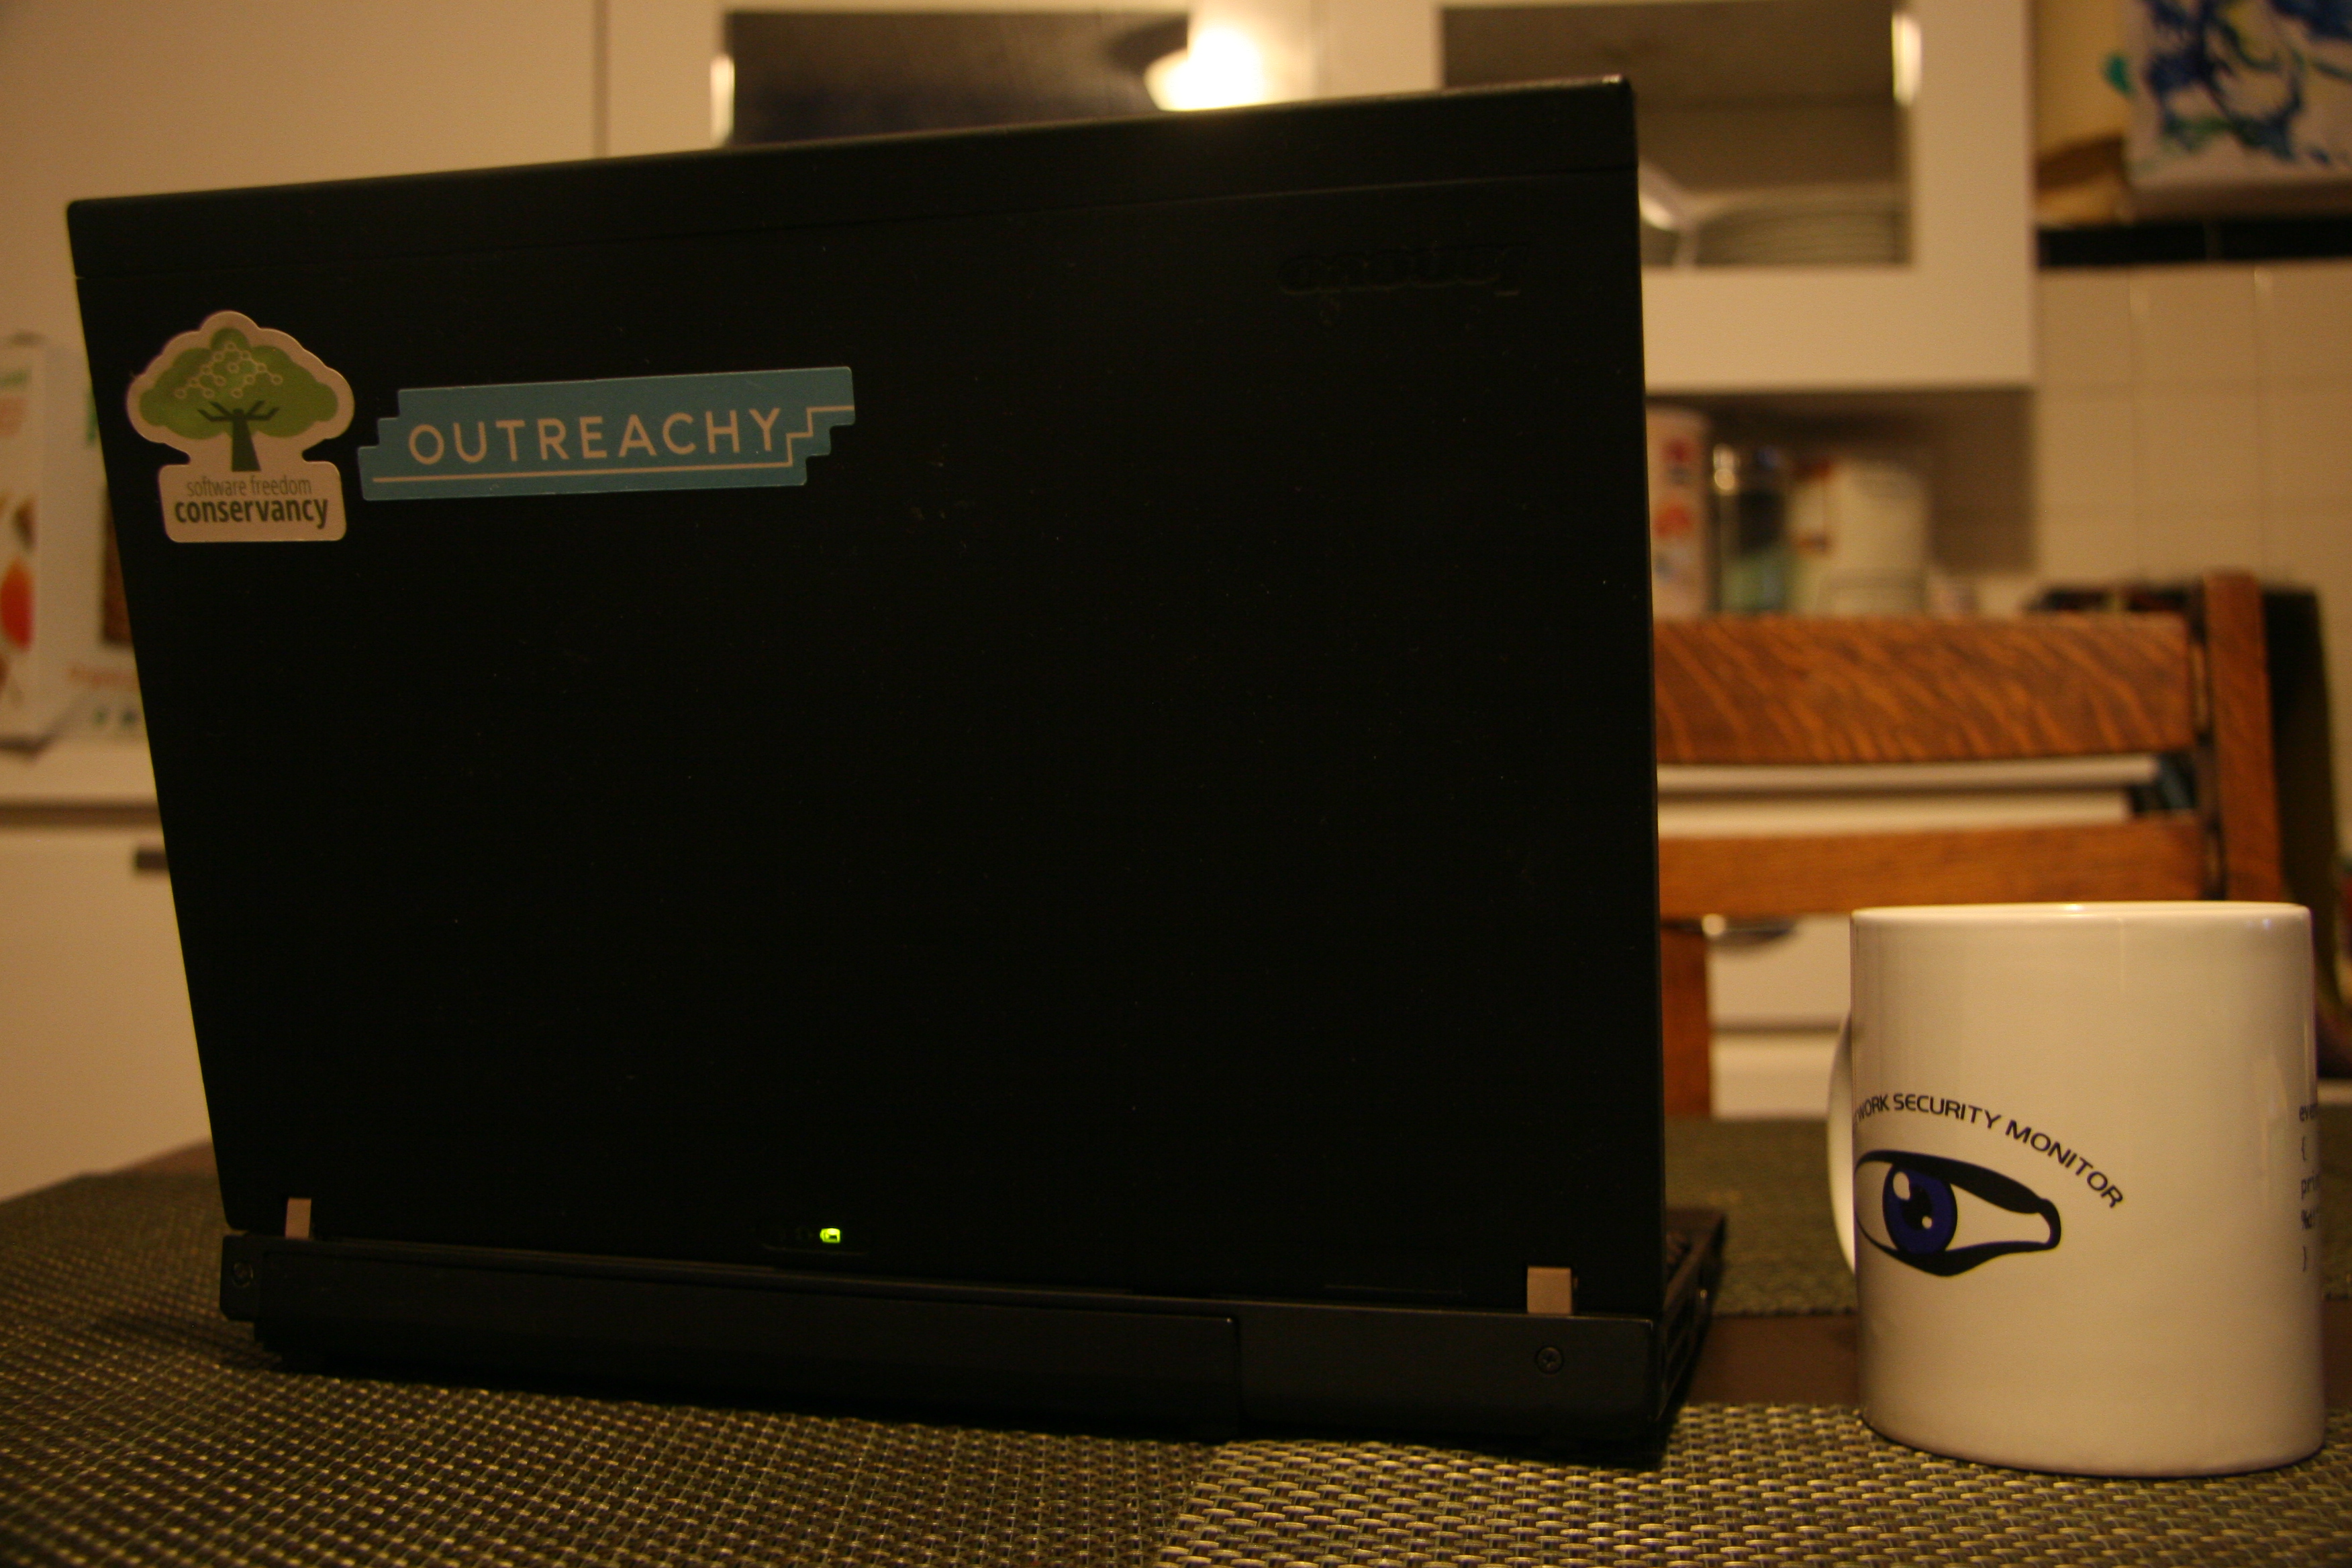 A laptop with Conservancy and Outreachy stickers, alongside a Bro mug